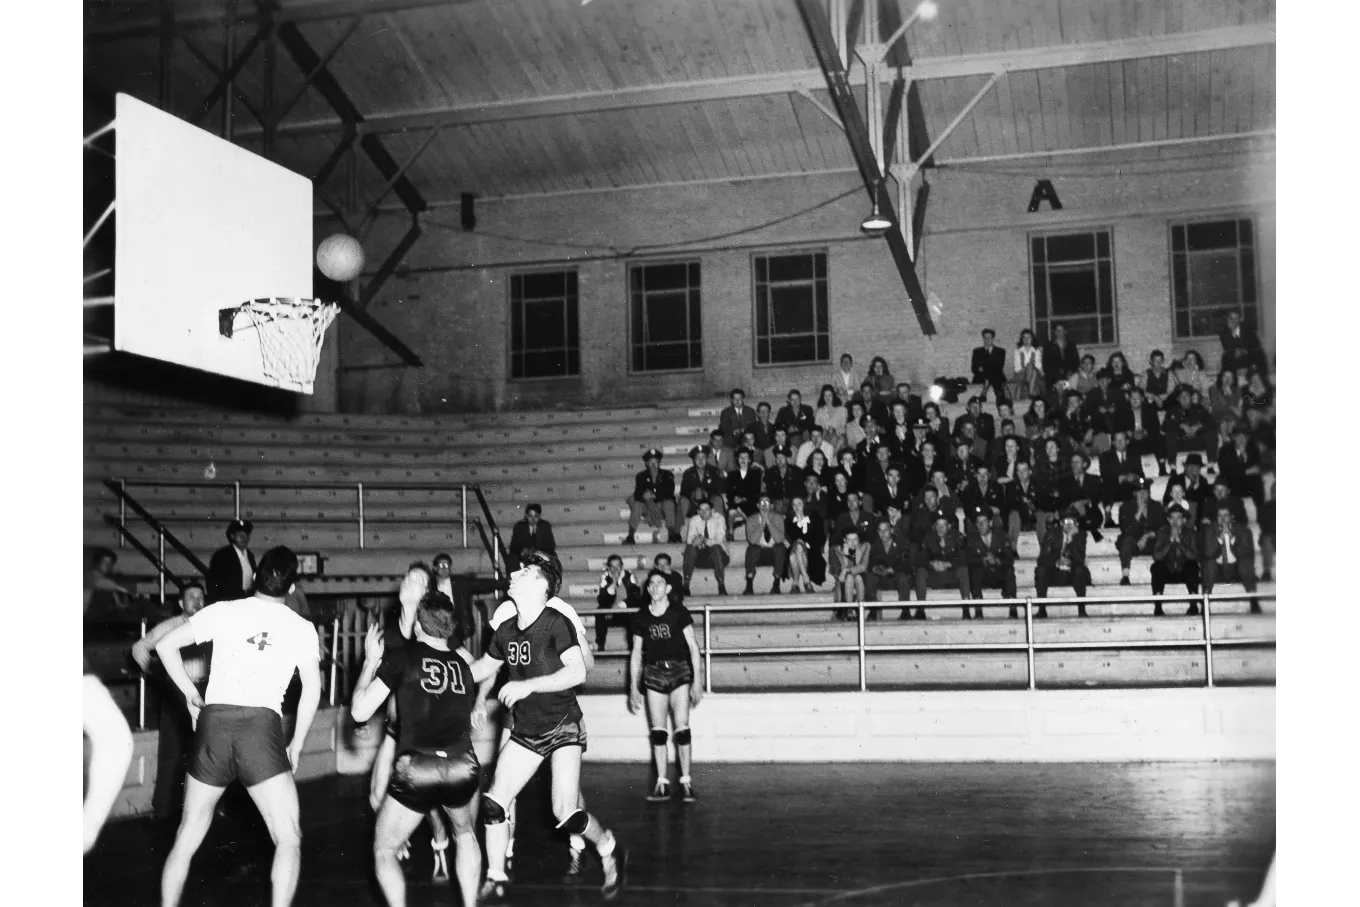 Basketball game in USC gymnasium now Longstreet Theater, 1942